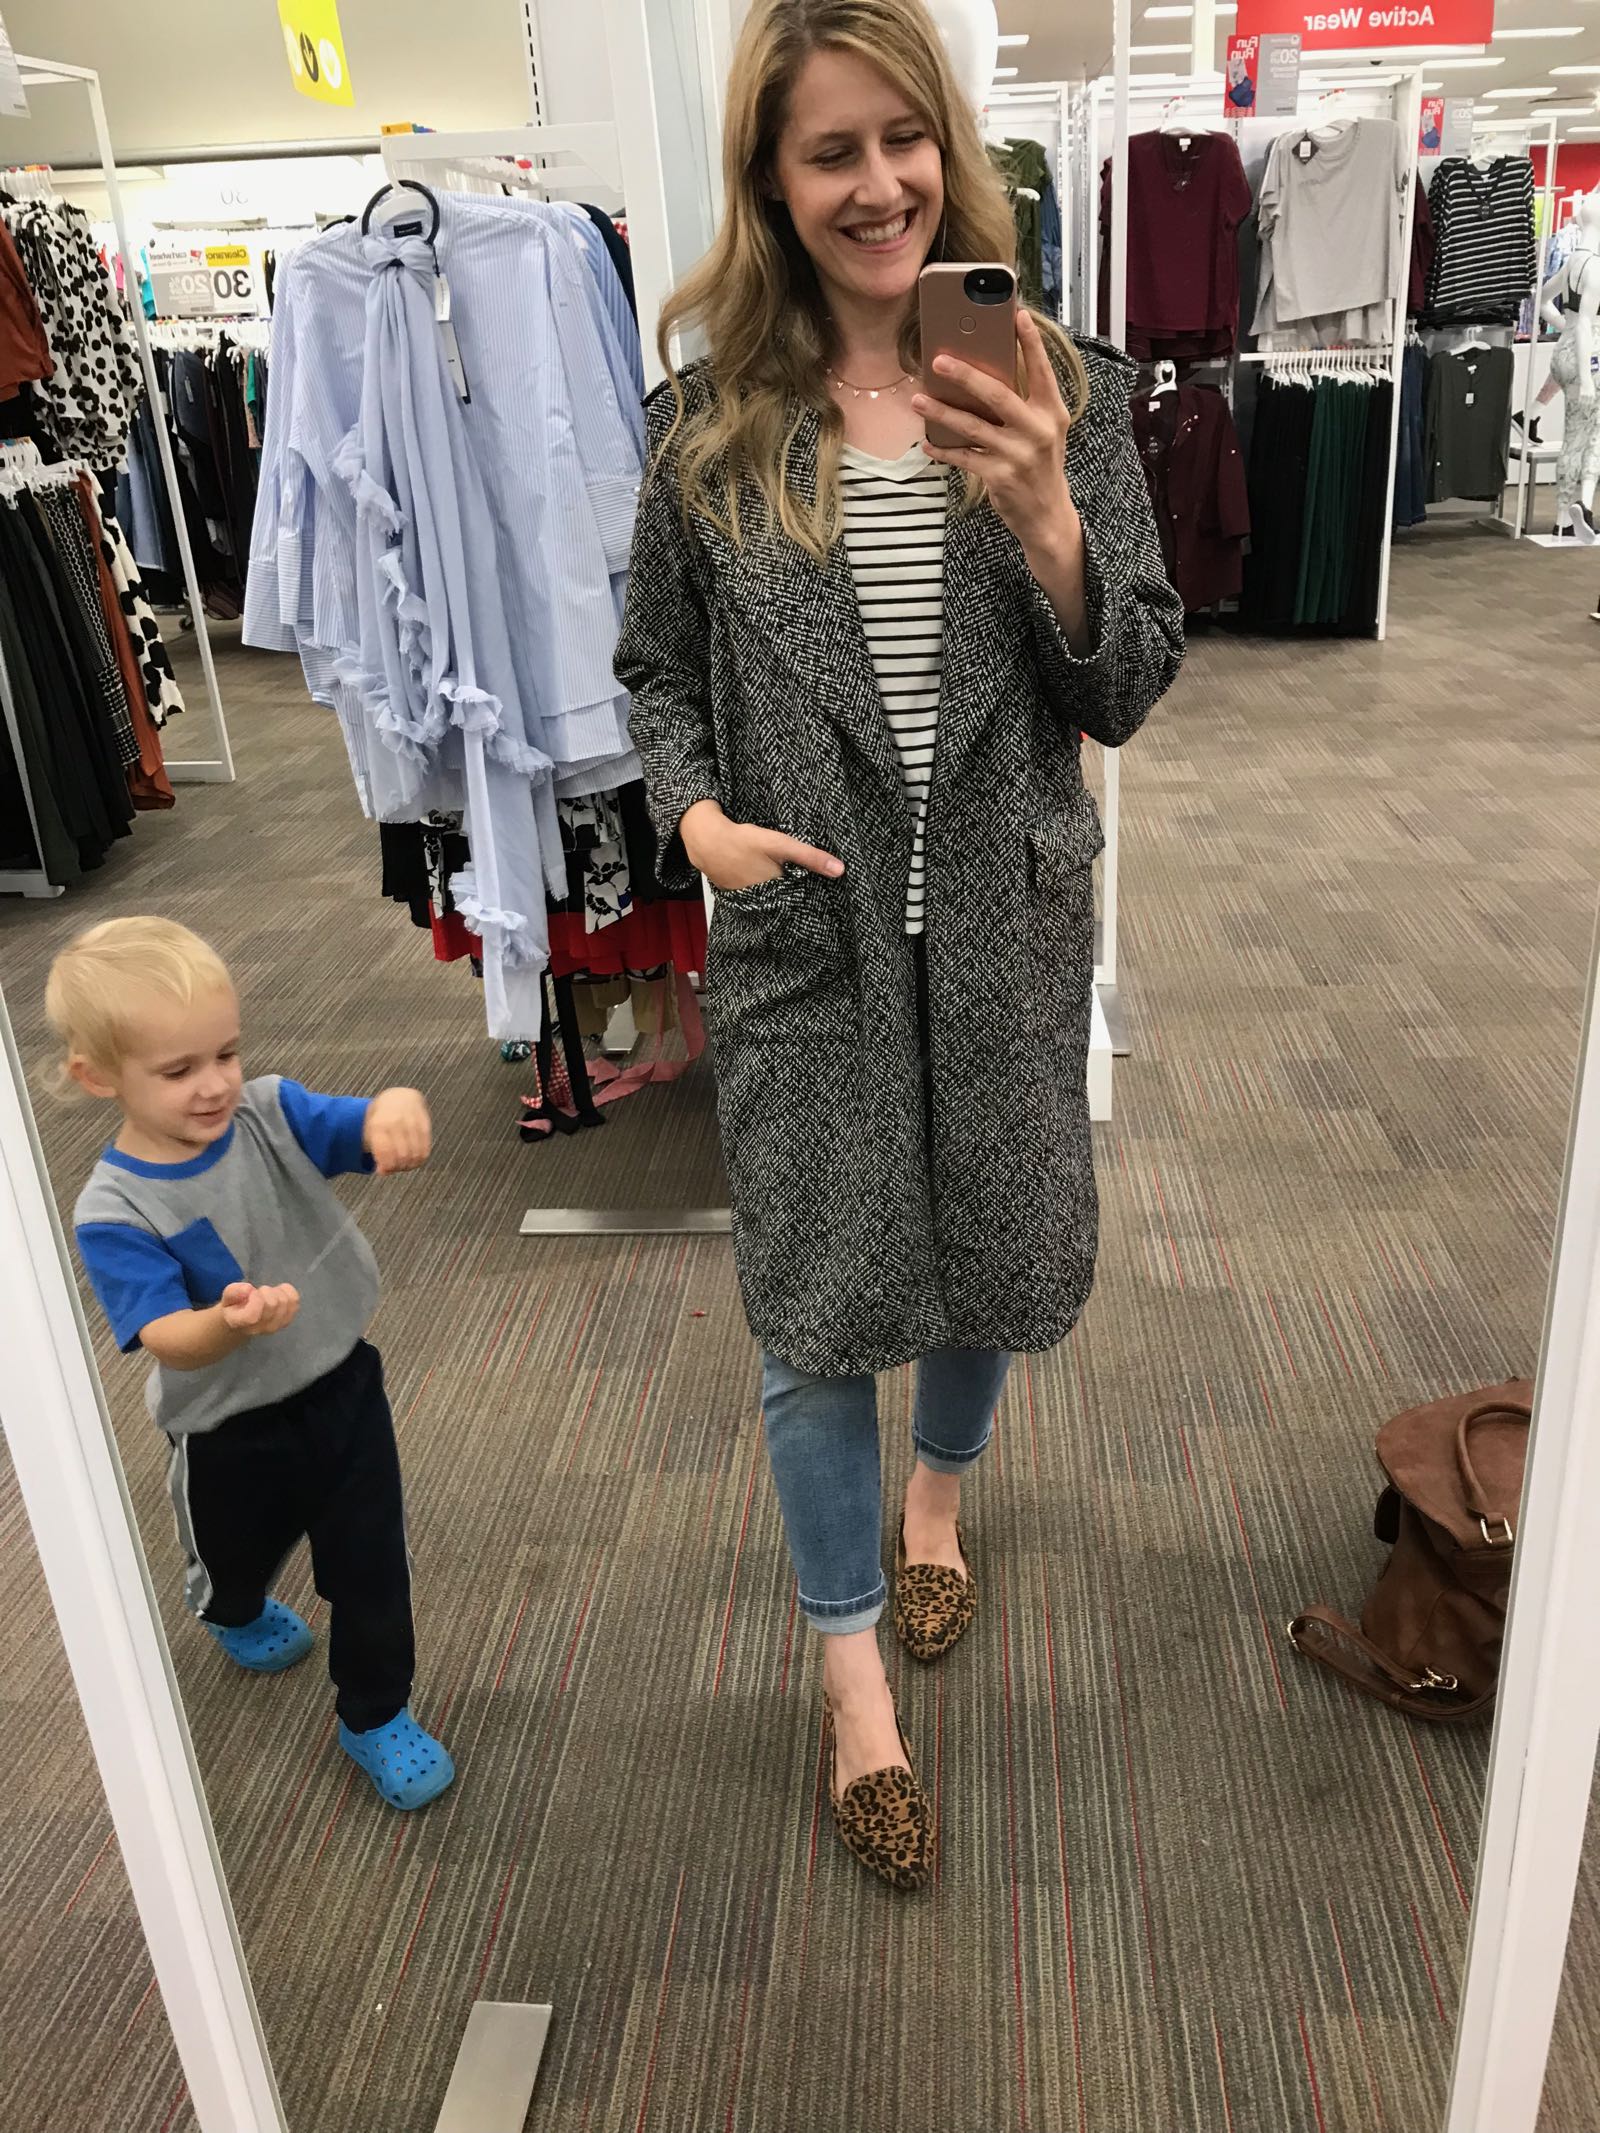 This blogger reviews Target's new minimal collection Prologue